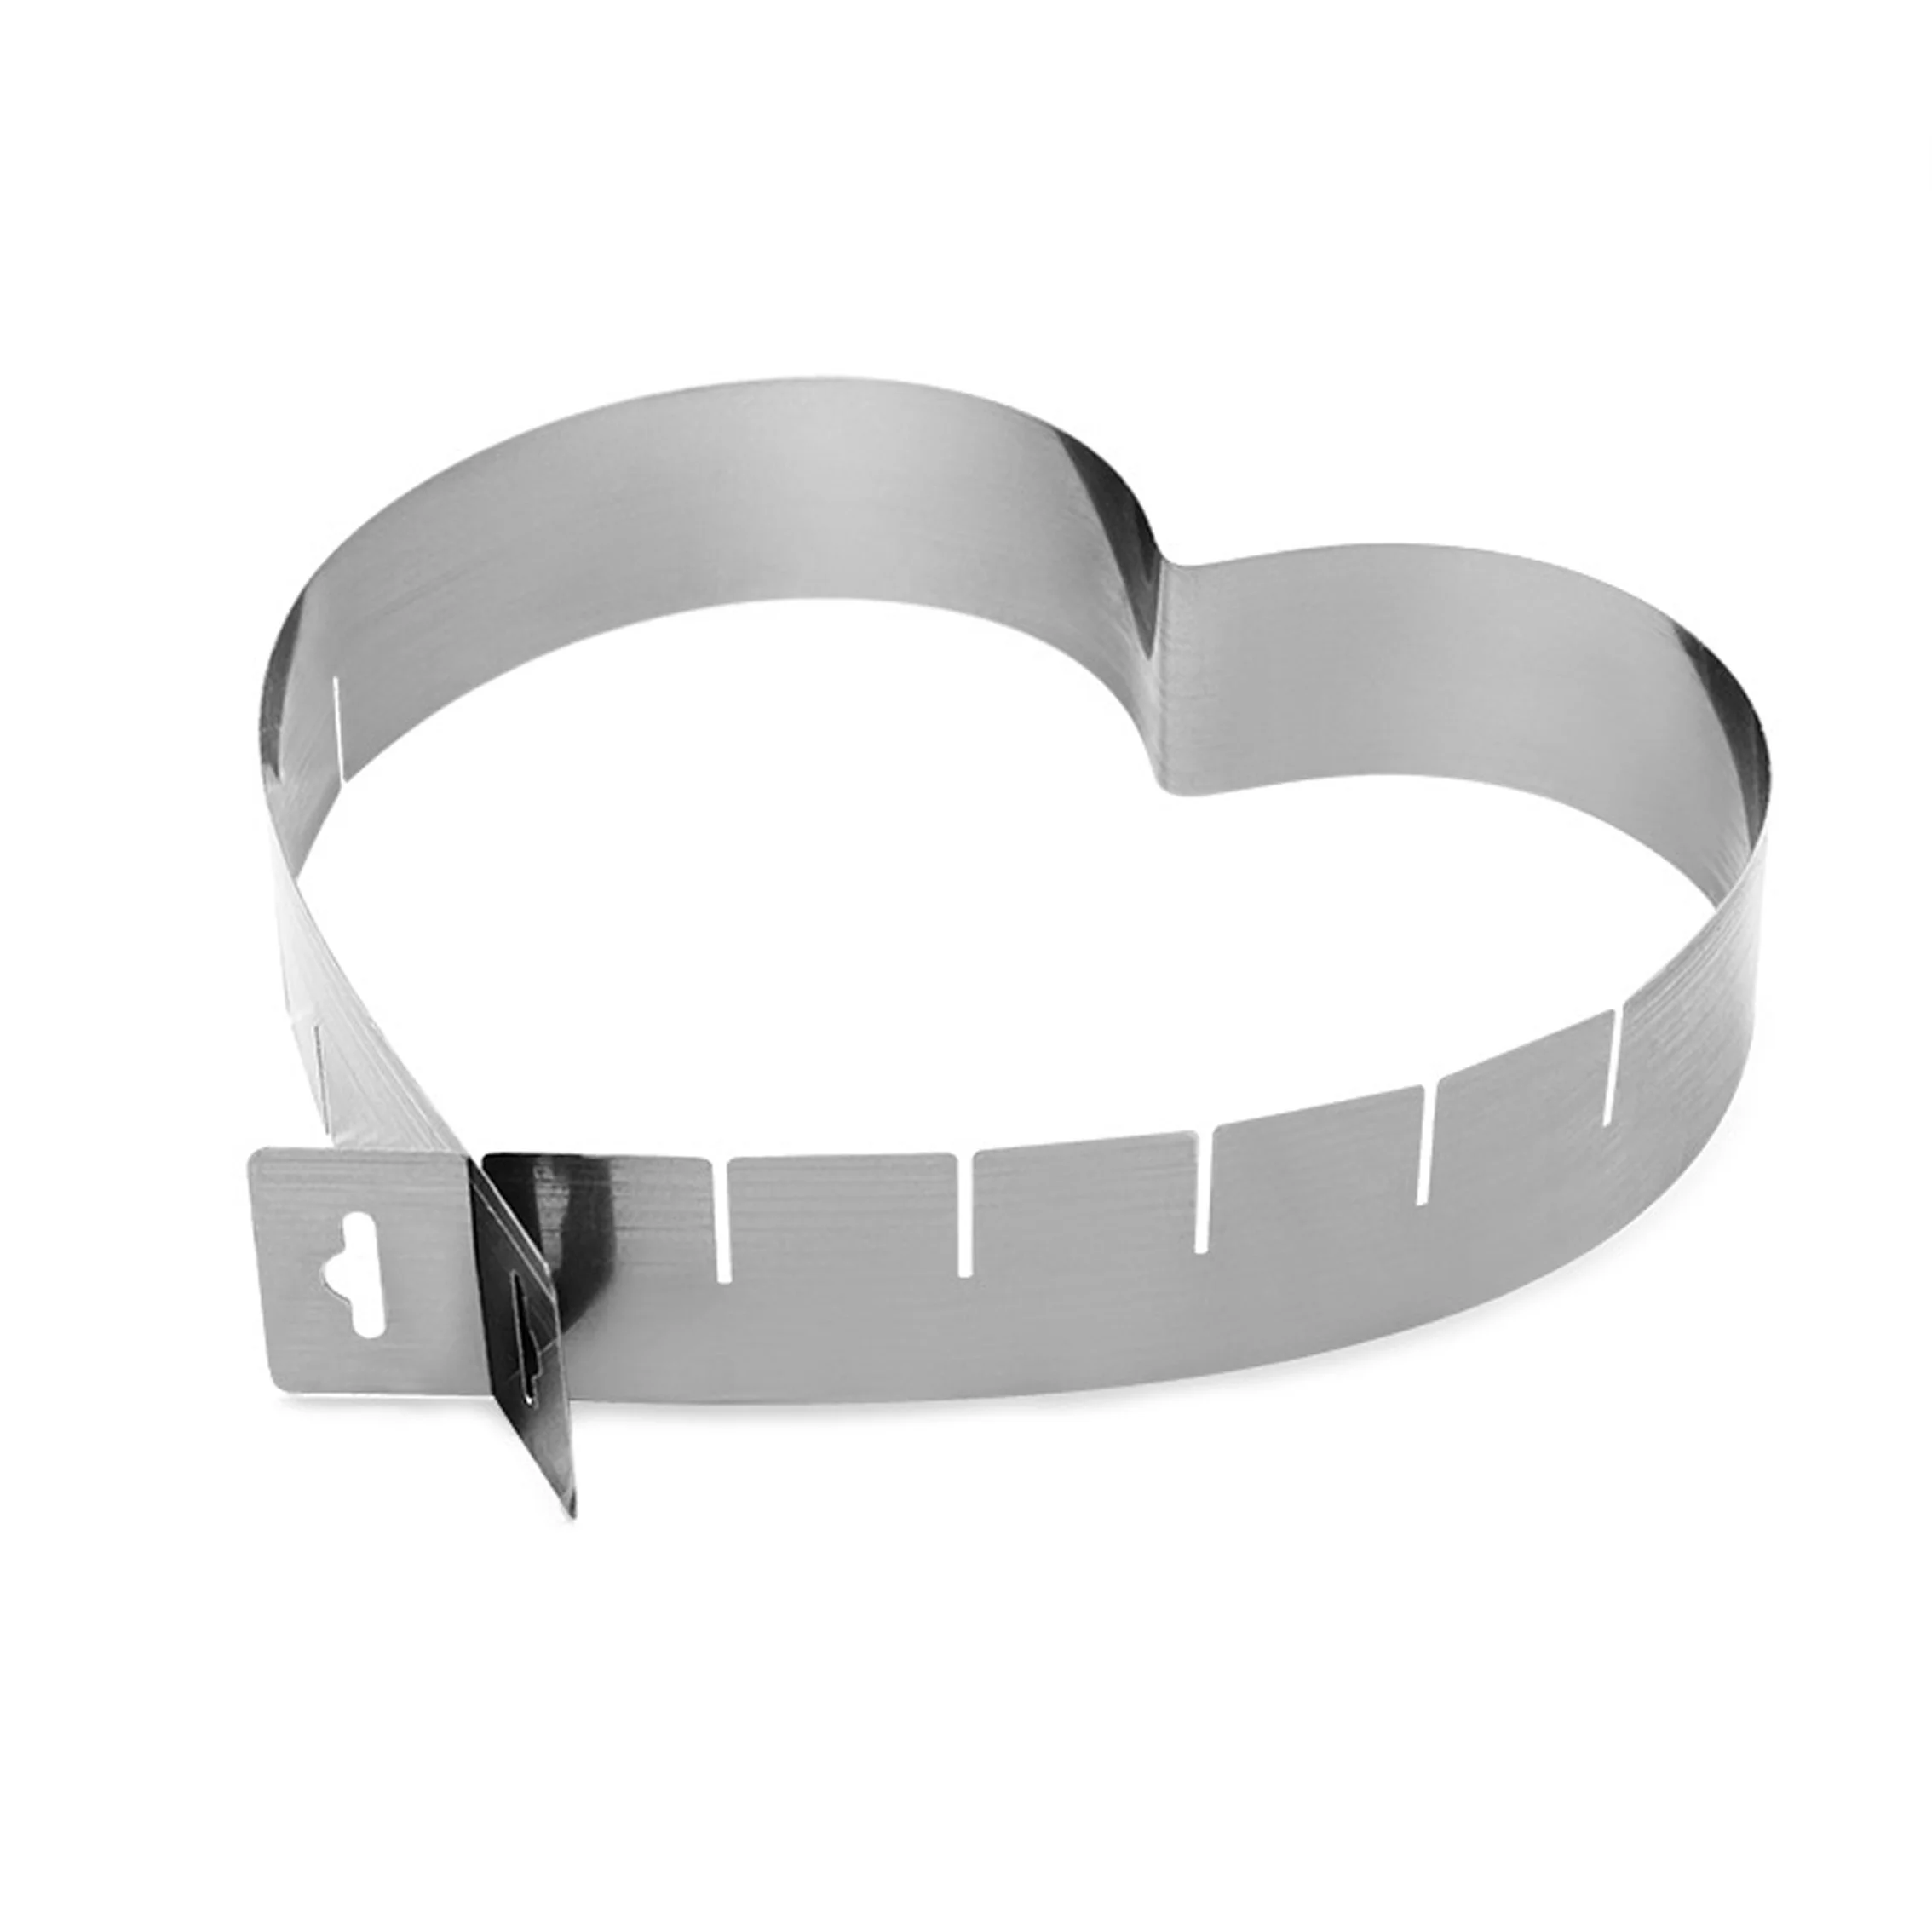 Hot Selling Adjustable Stainless Steel Heart Shaped Ring Baking Mold Mousse Cake Cutting Kitchen Accessories